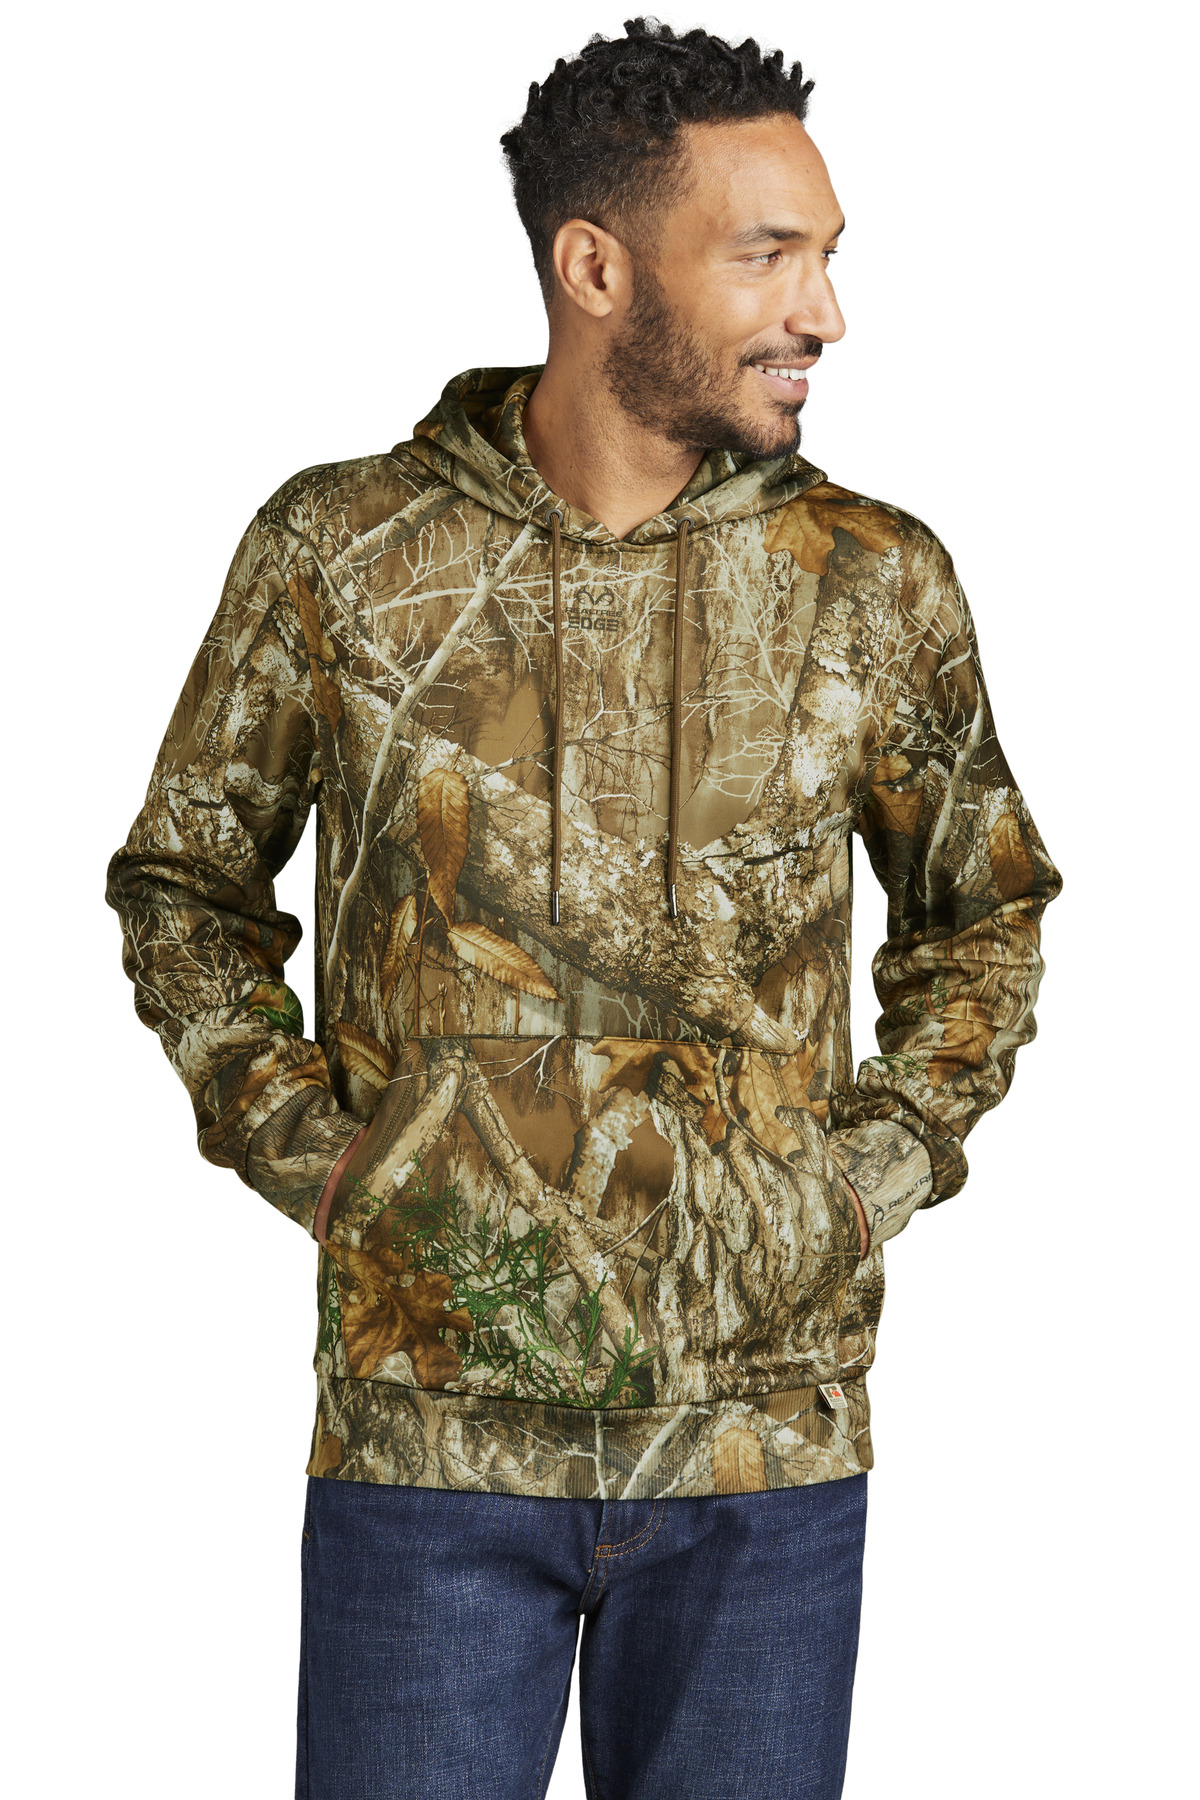 Russell Outdoors Realtree Pullover Hoodie RU400 - Unitex Direct